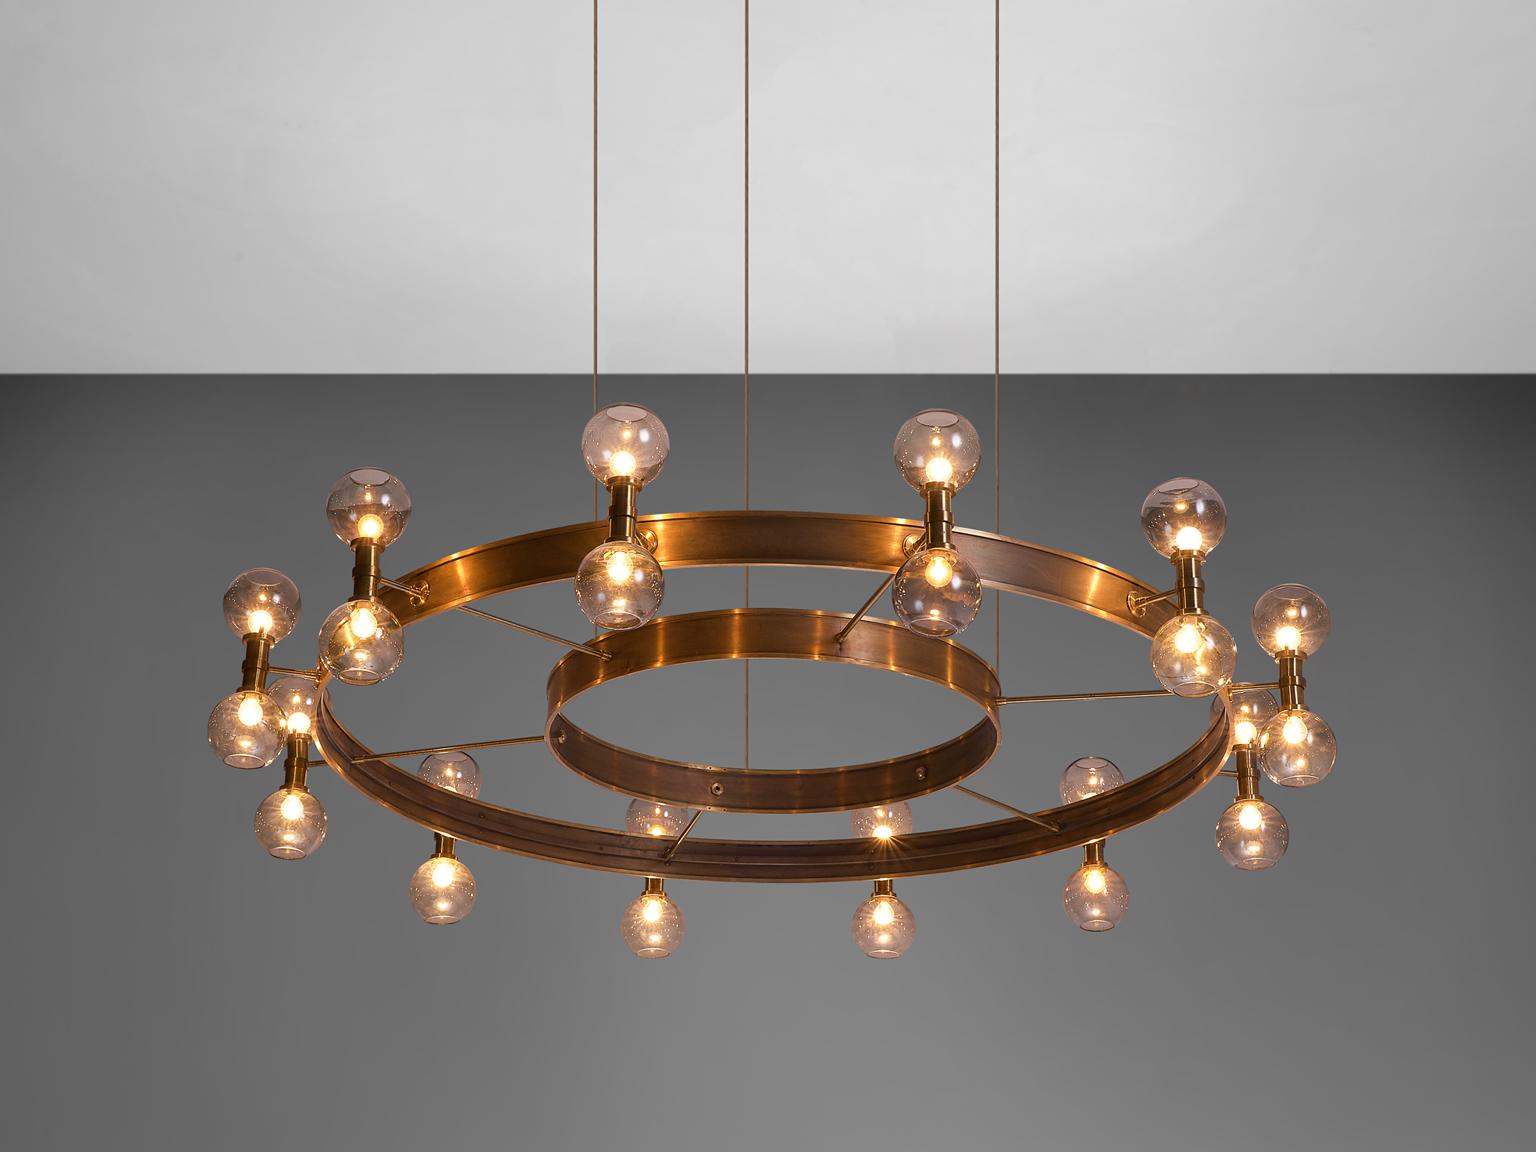 Carl Corwin, gigantic chandelier, brass and glass, Norway, 1958

Extremely large chandelier designed by Carl Corwin. This grand chandelier has a diameter of 220 cm and used to be housed in the Kong Haakon's Church in Copenhagen. The chandelier was